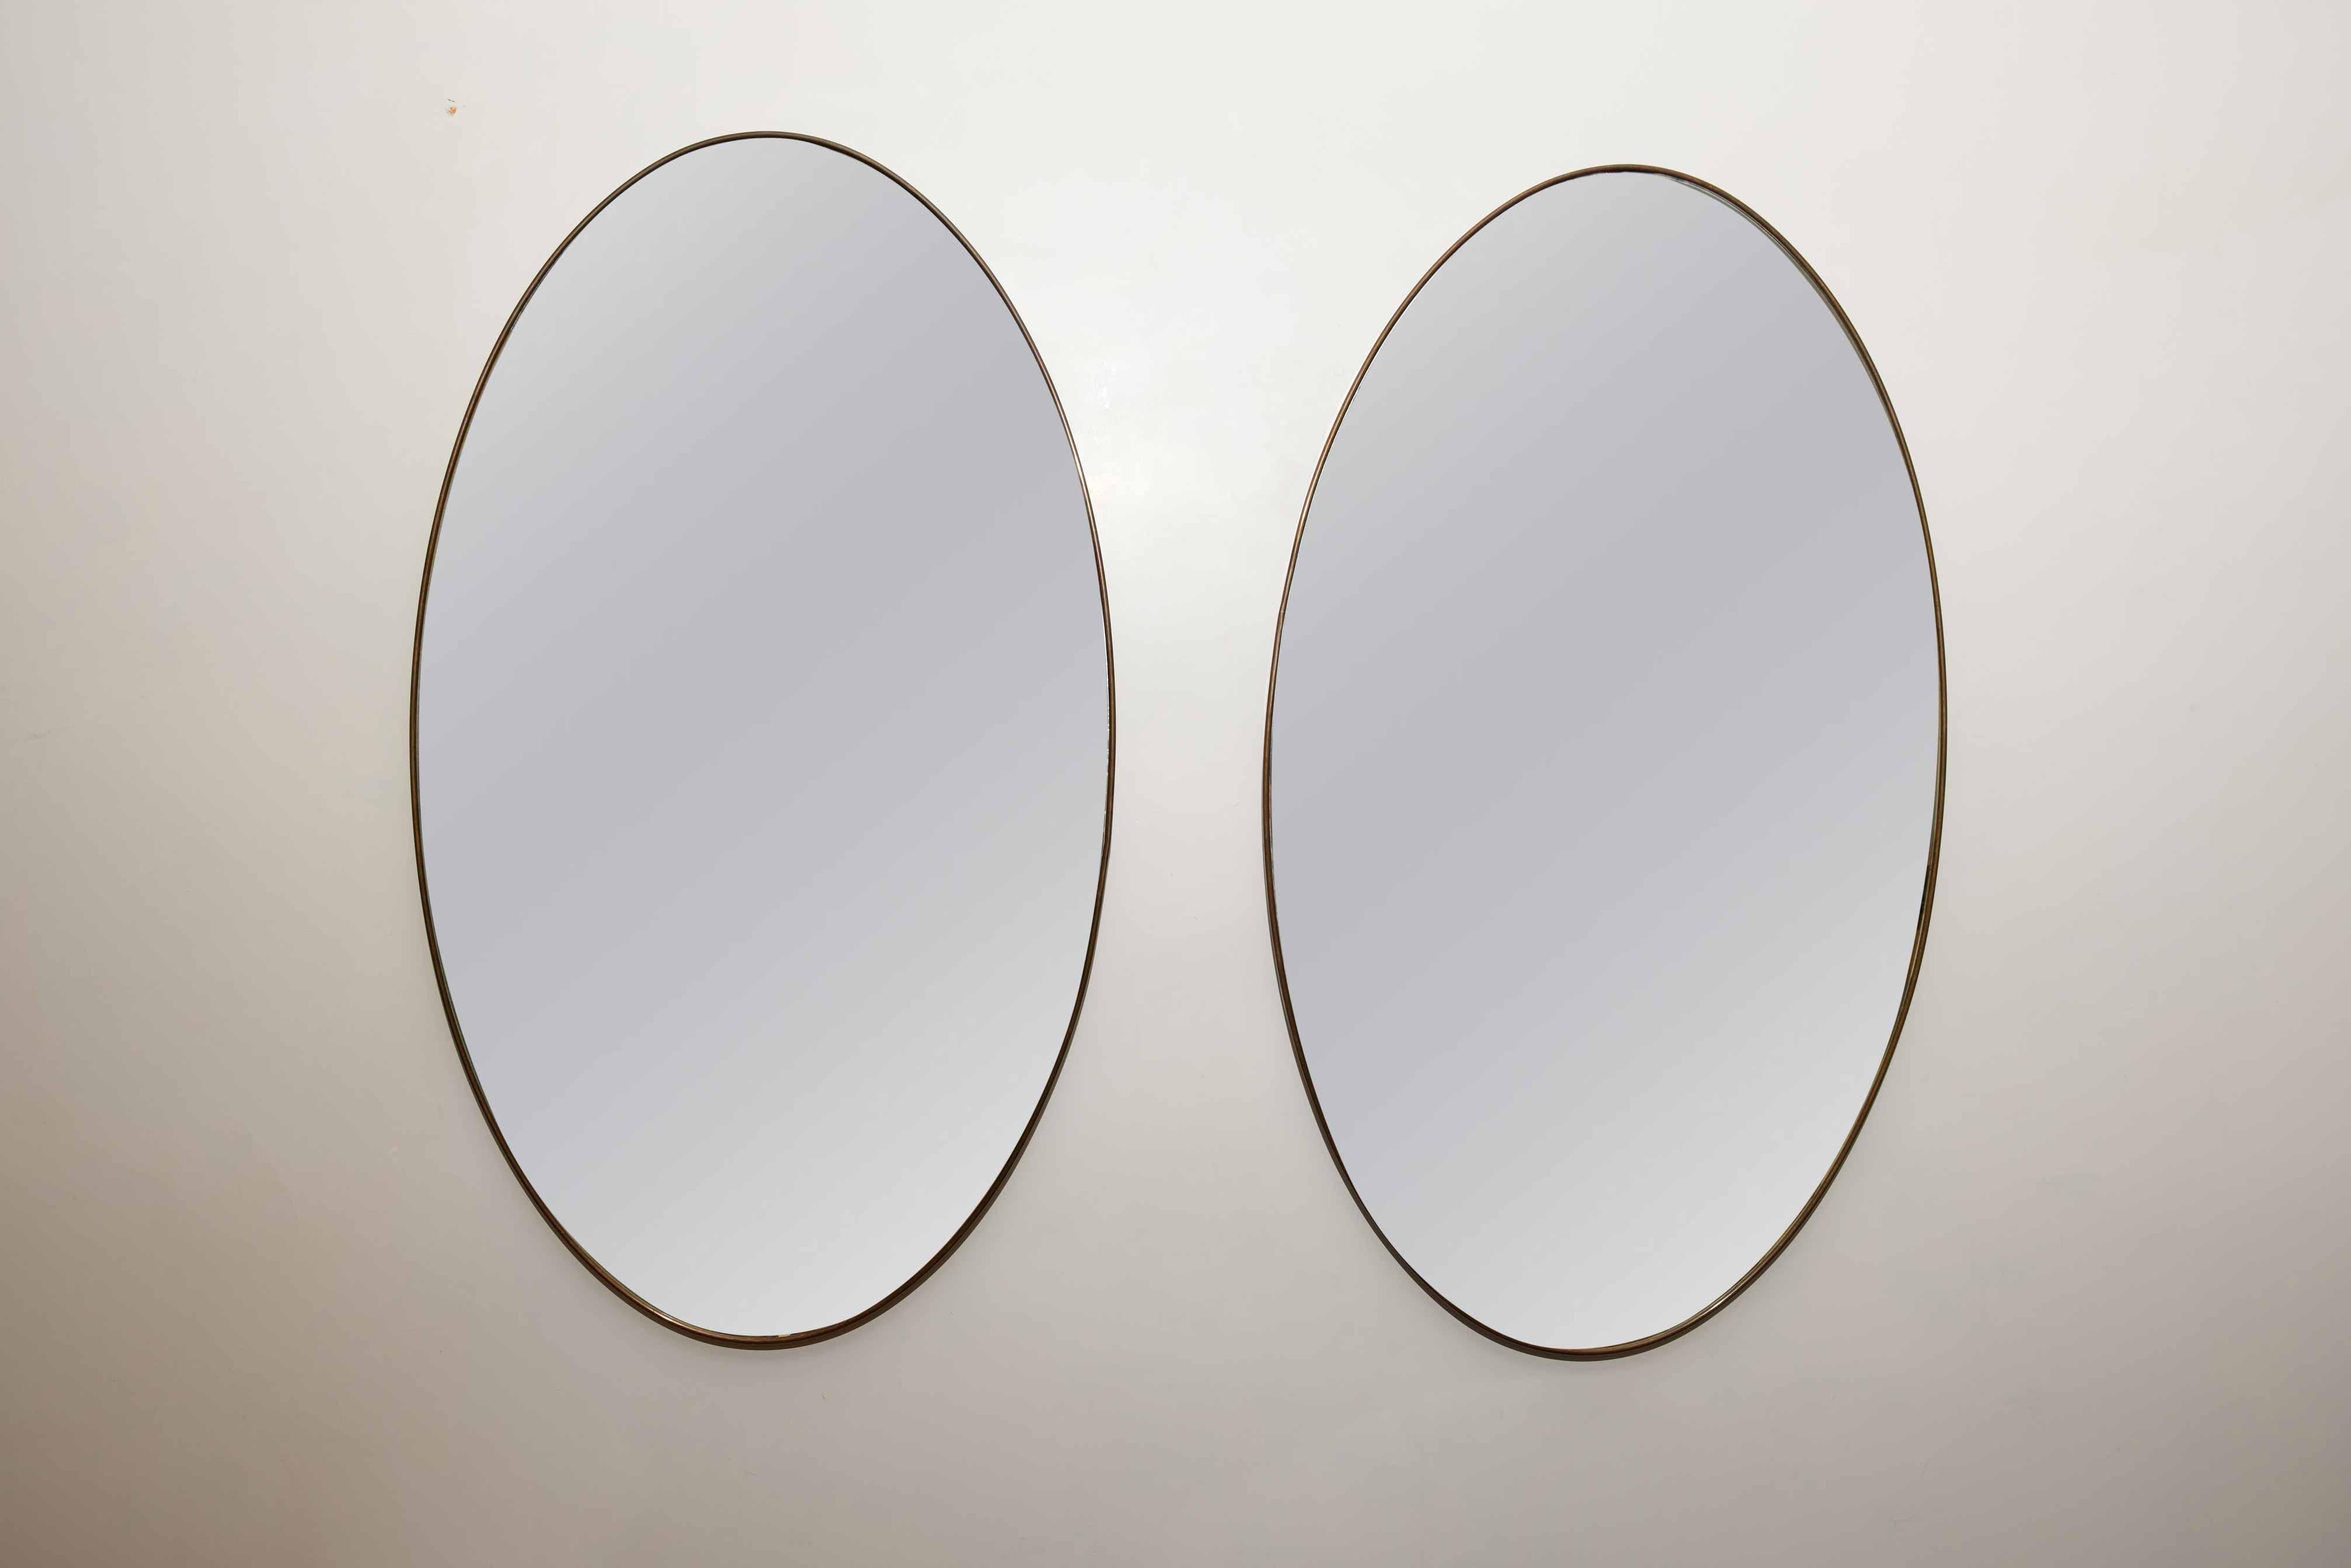 Pair of Italian Modernist Brass Oval Grand Scale Wall Mirrors, Italy, circa 1950 For Sale 5